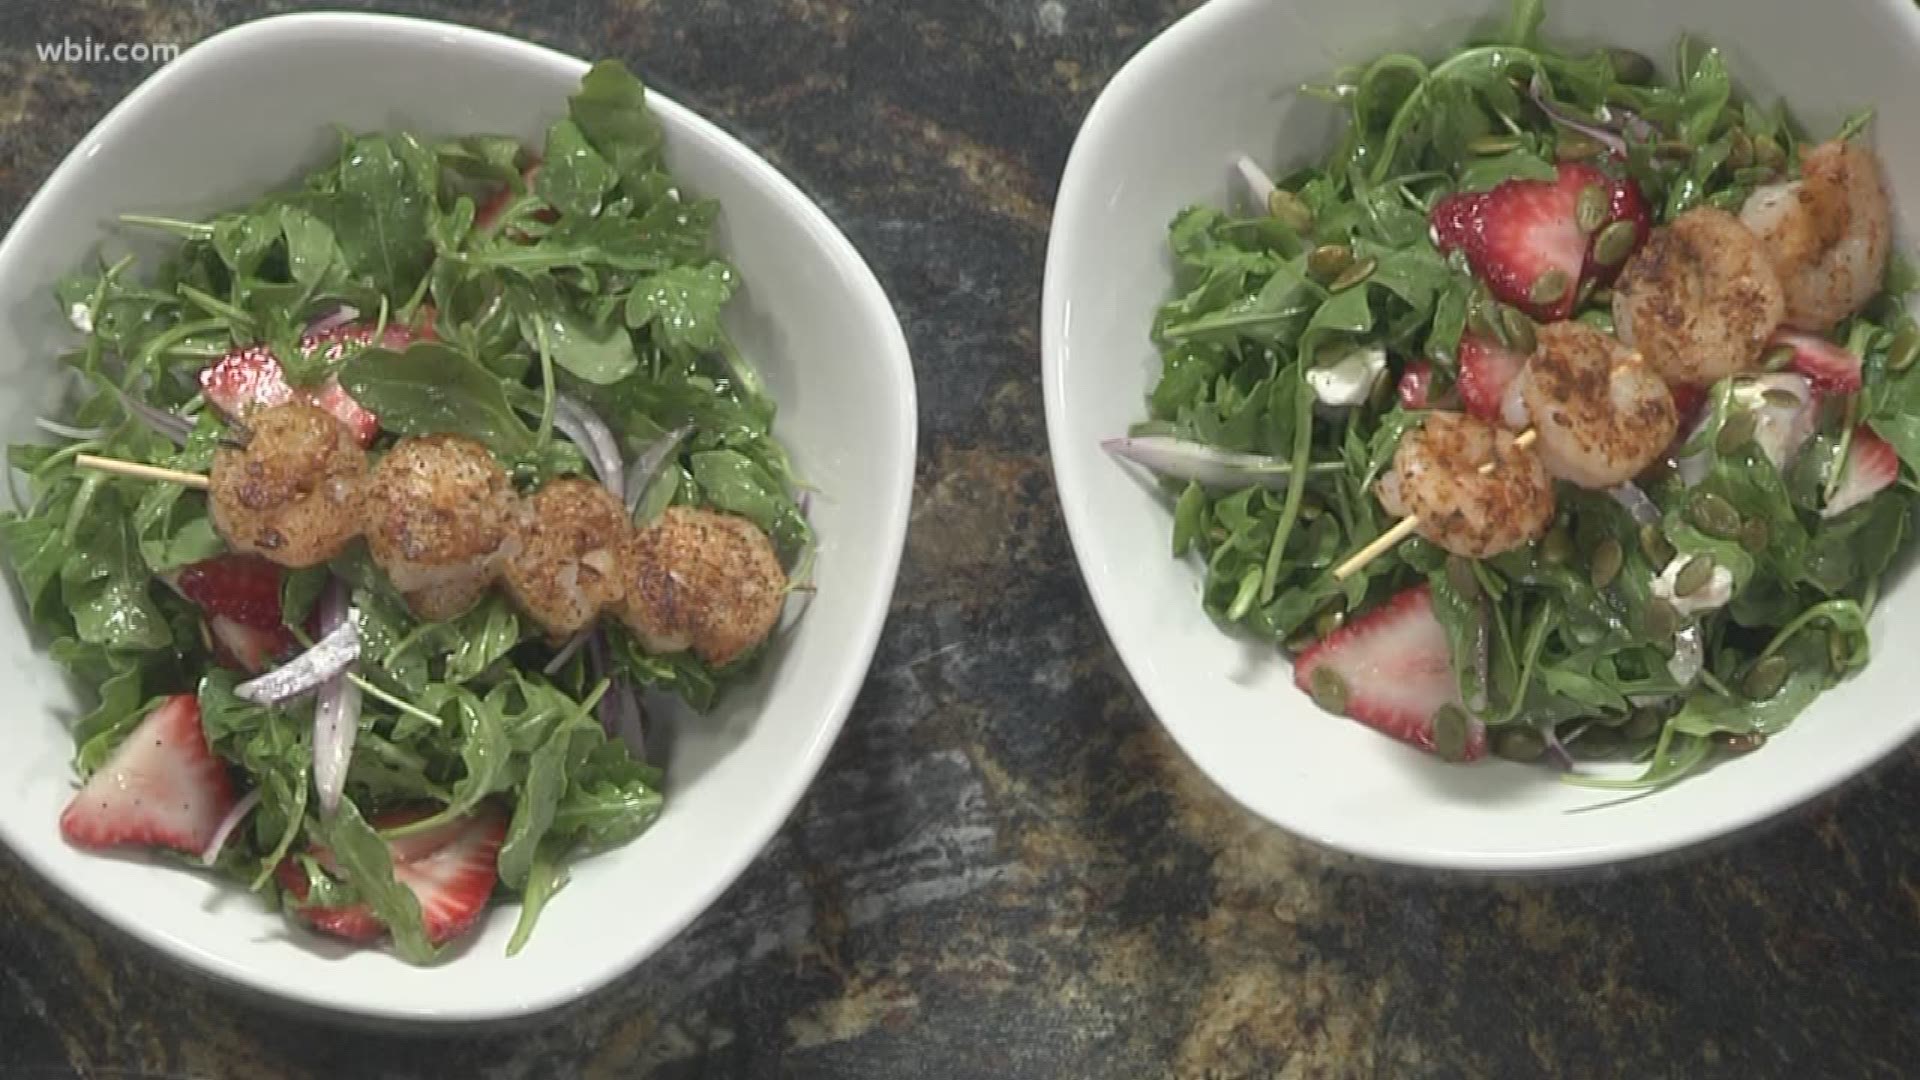 Chef TJ from Babalu shows us how to make a delicious salad.